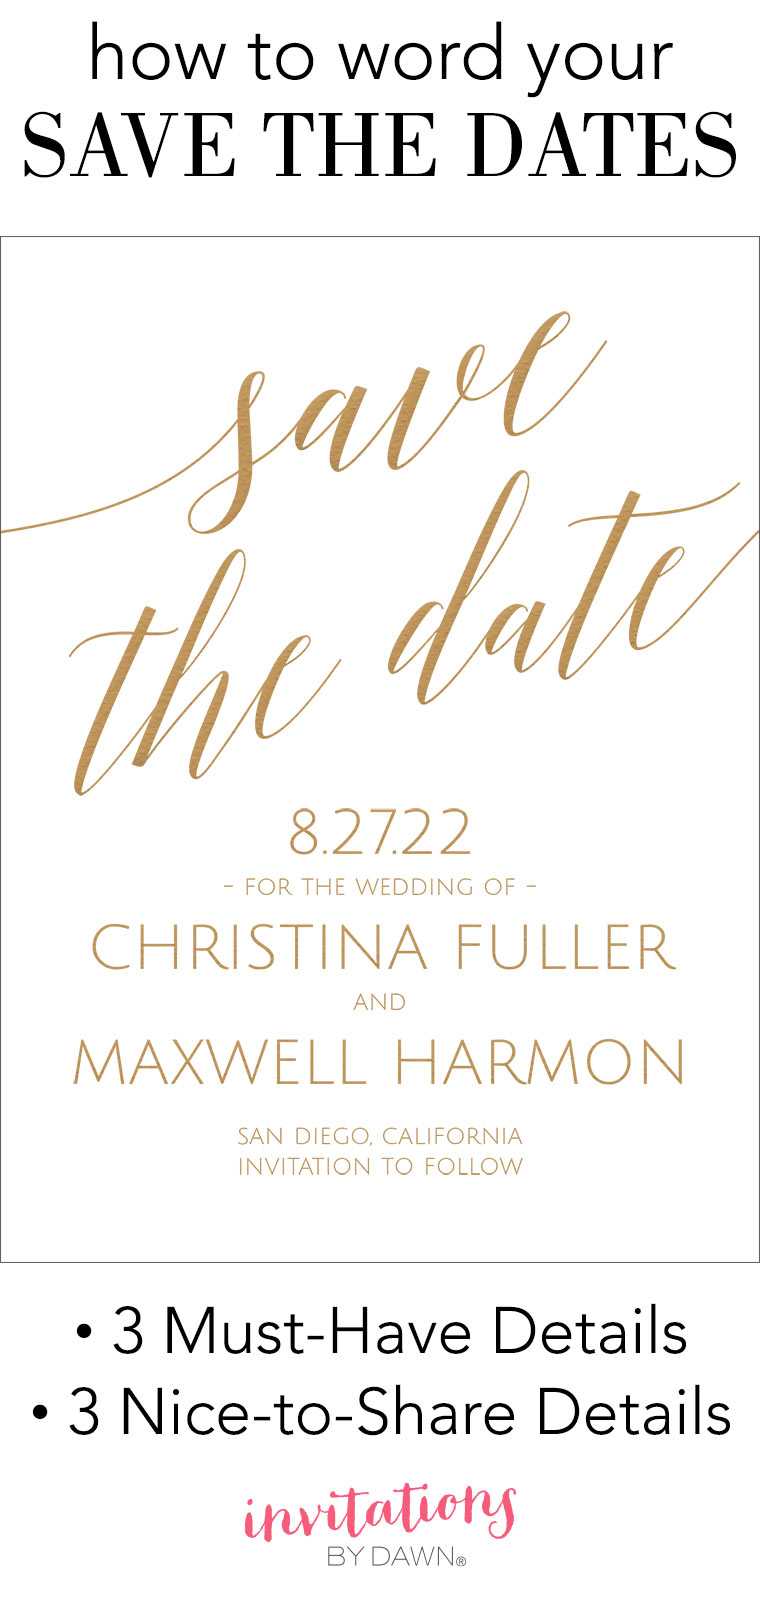 014 Save The Date Word Template Dawn Wording Main Intended For Save The Date Template Word